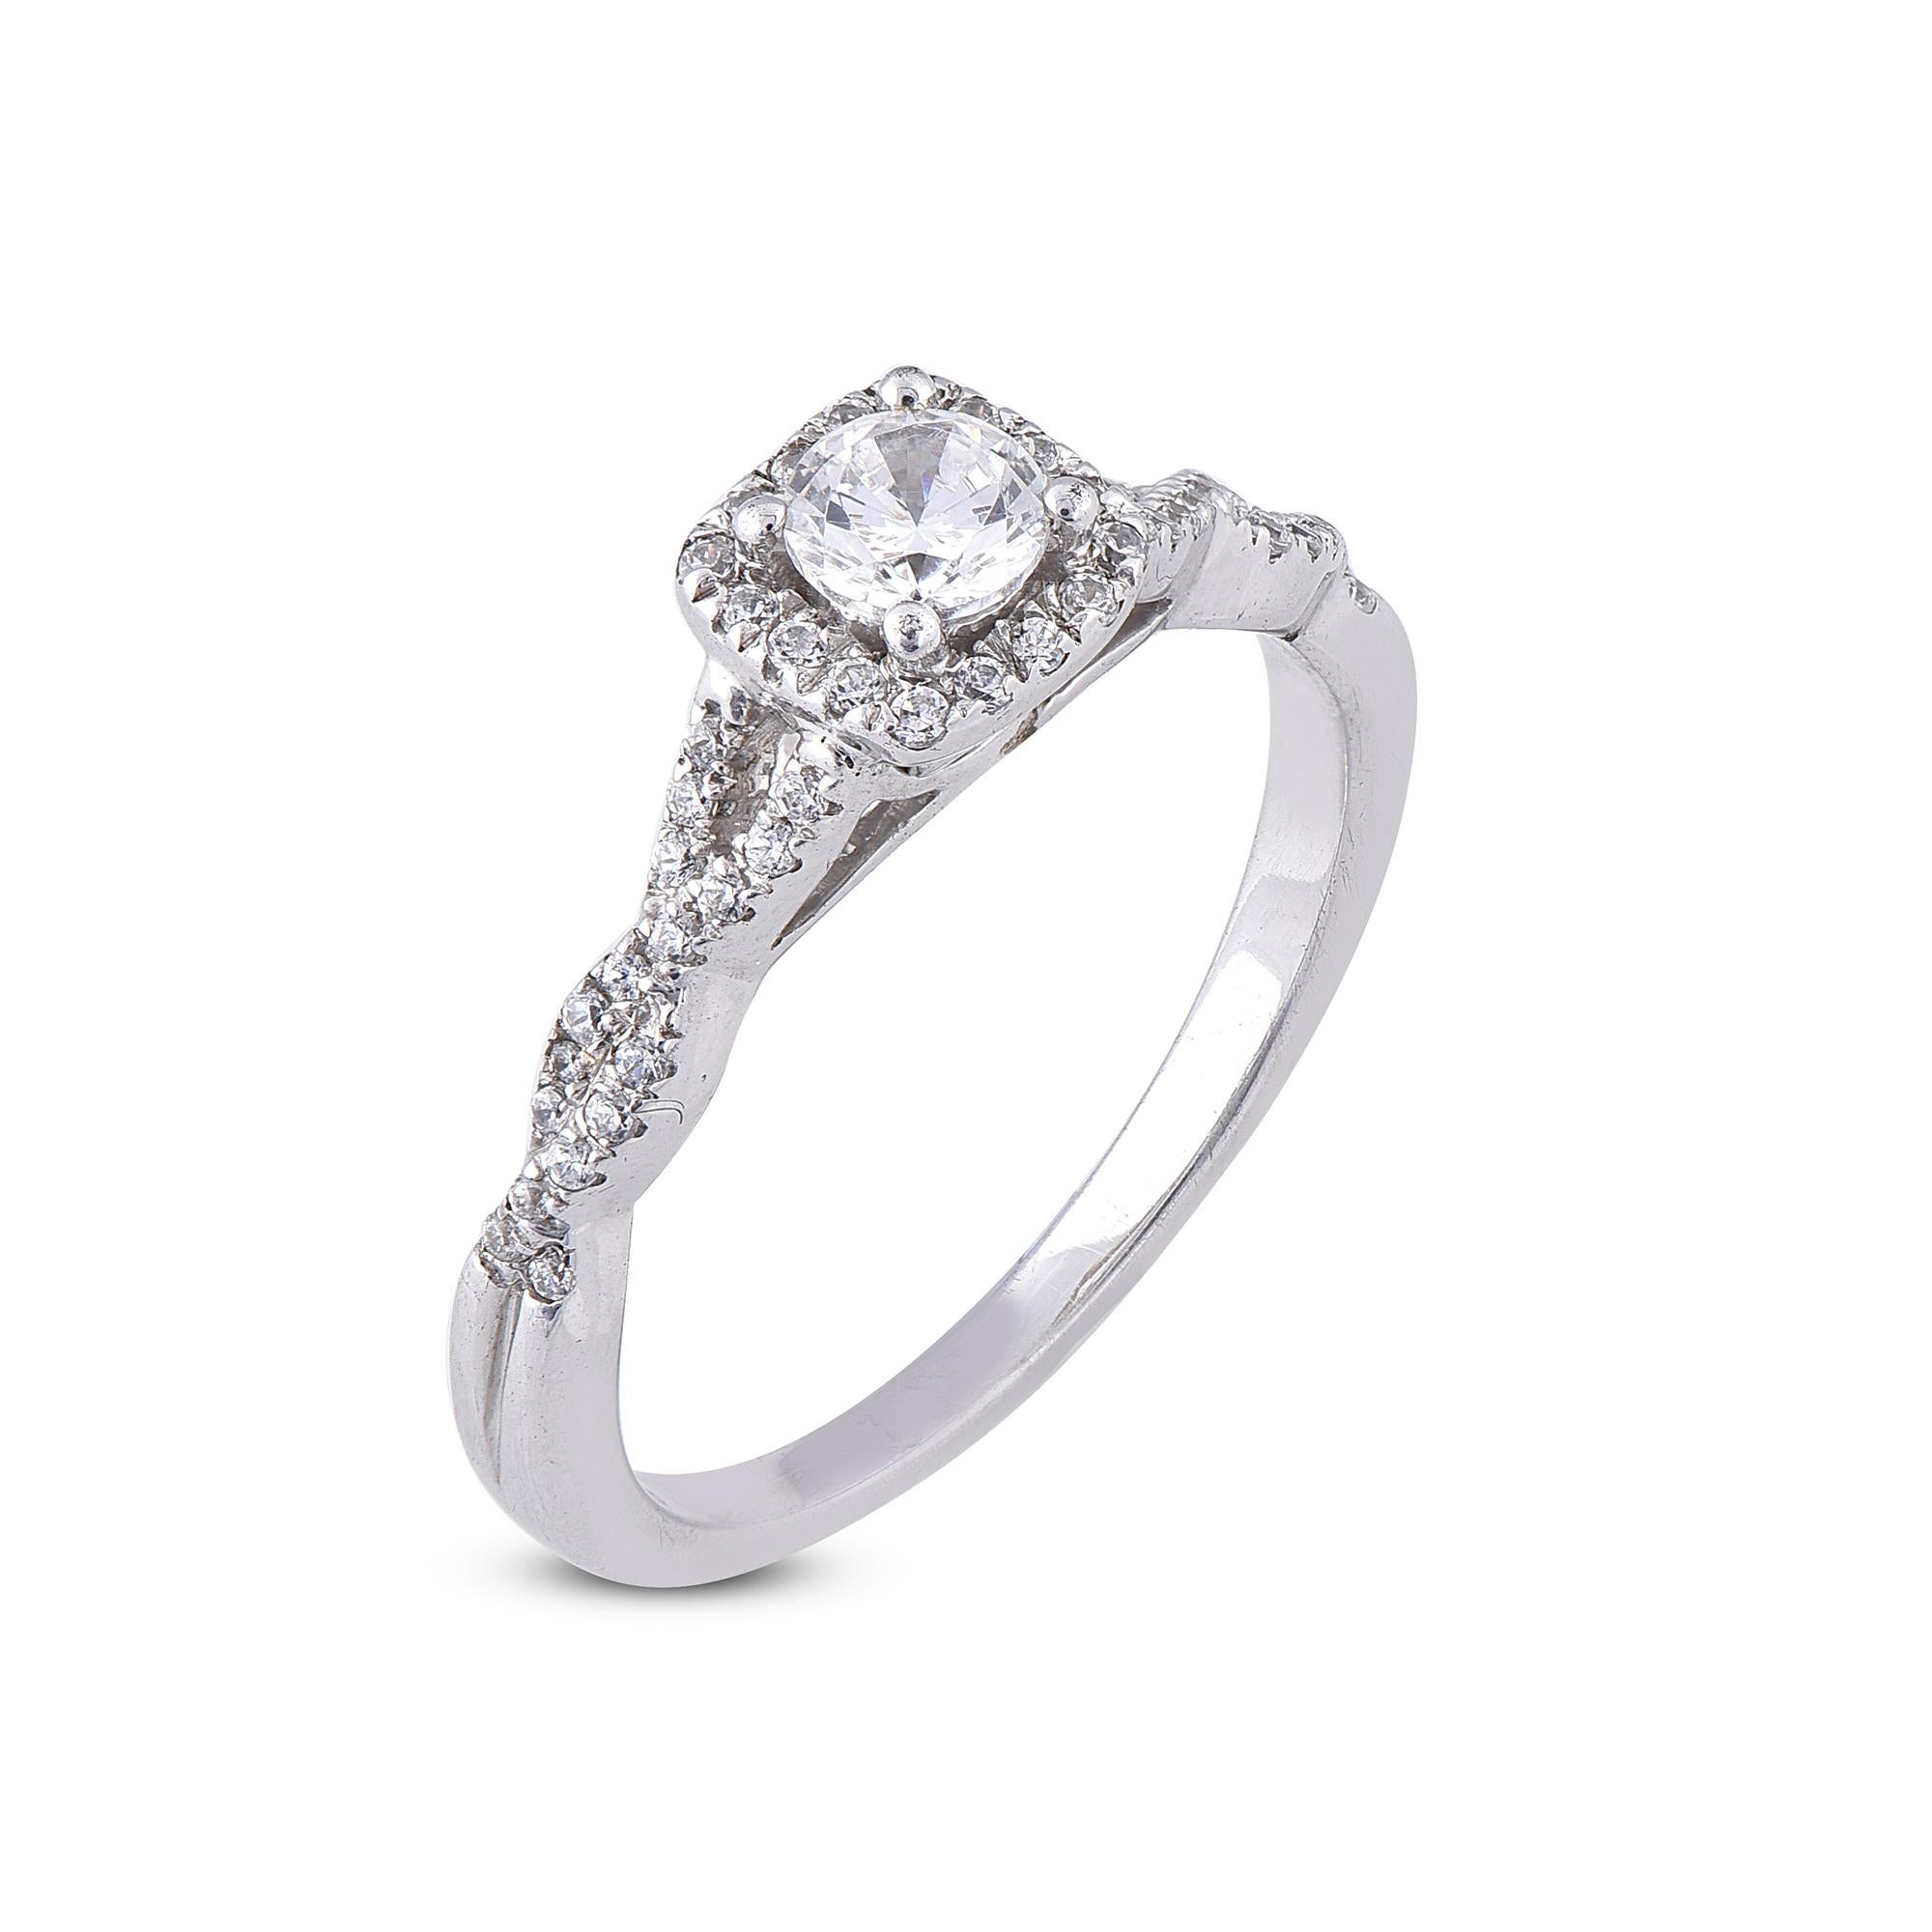 Exquisite 18 Karat white gold engagement ring featuring with 51 round white diamonds. This ring is superbly detailed to perfection and set with 0.30ct of center stone and remaining 0.20 of sparkling round diamonds in secured pave and prong setting.